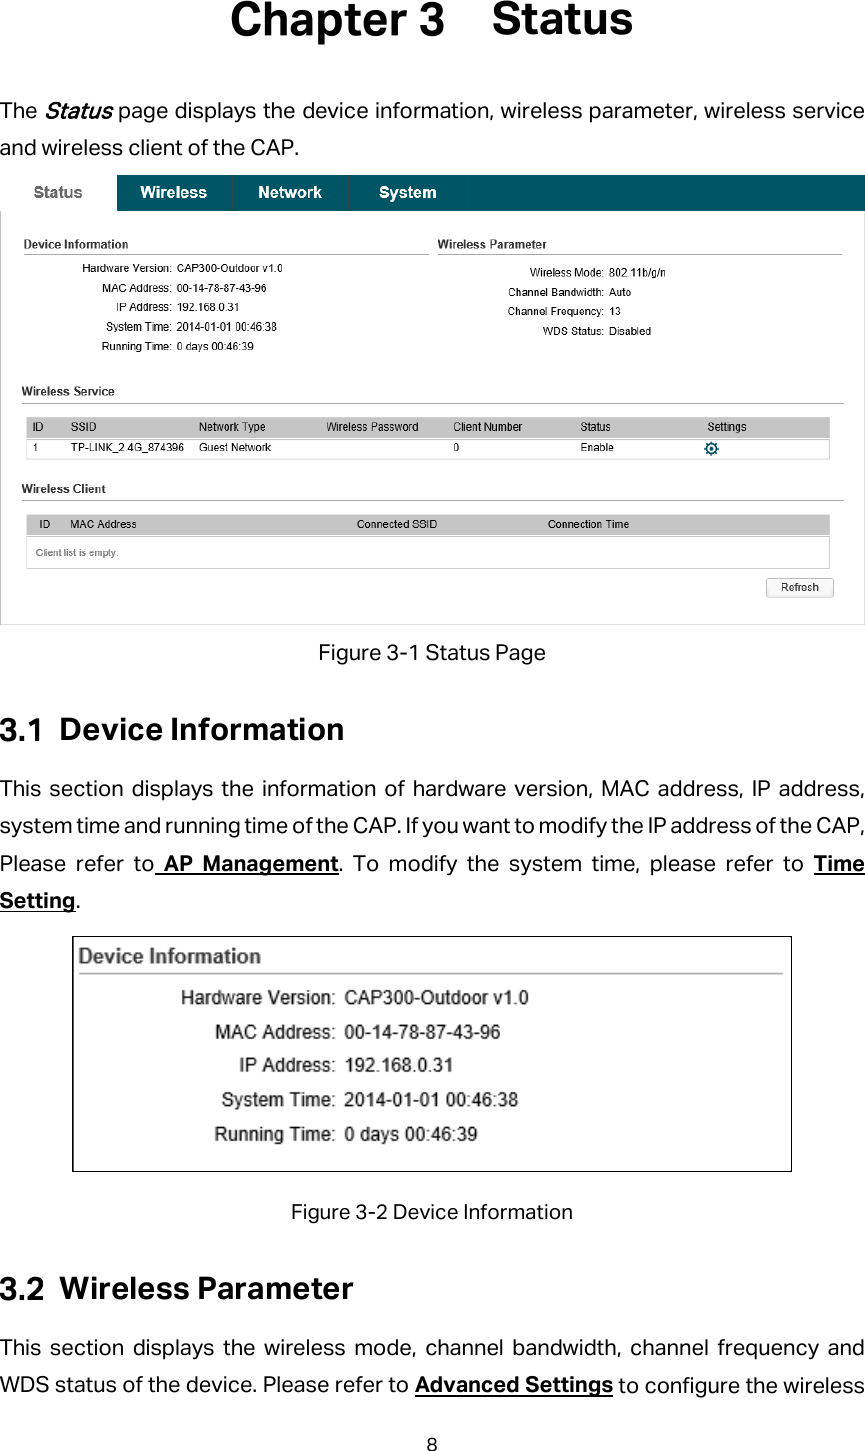  Status The Status page displays the device information, wireless parameter, wireless service and wireless client of the CAP.  Figure 3-1 Status Page  Device Information This section displays the information of hardware version, MAC address, IP address, system time and running time of the CAP. If you want to modify the IP address of the CAP, Please refer to AP Management. To modify the system time, please refer to Time Setting.  Figure 3-2 Device Information  Wireless Parameter This section displays the wireless mode, channel bandwidth, channel frequency and WDS status of the device. Please refer to Advanced Settings to configure the wireless 8 